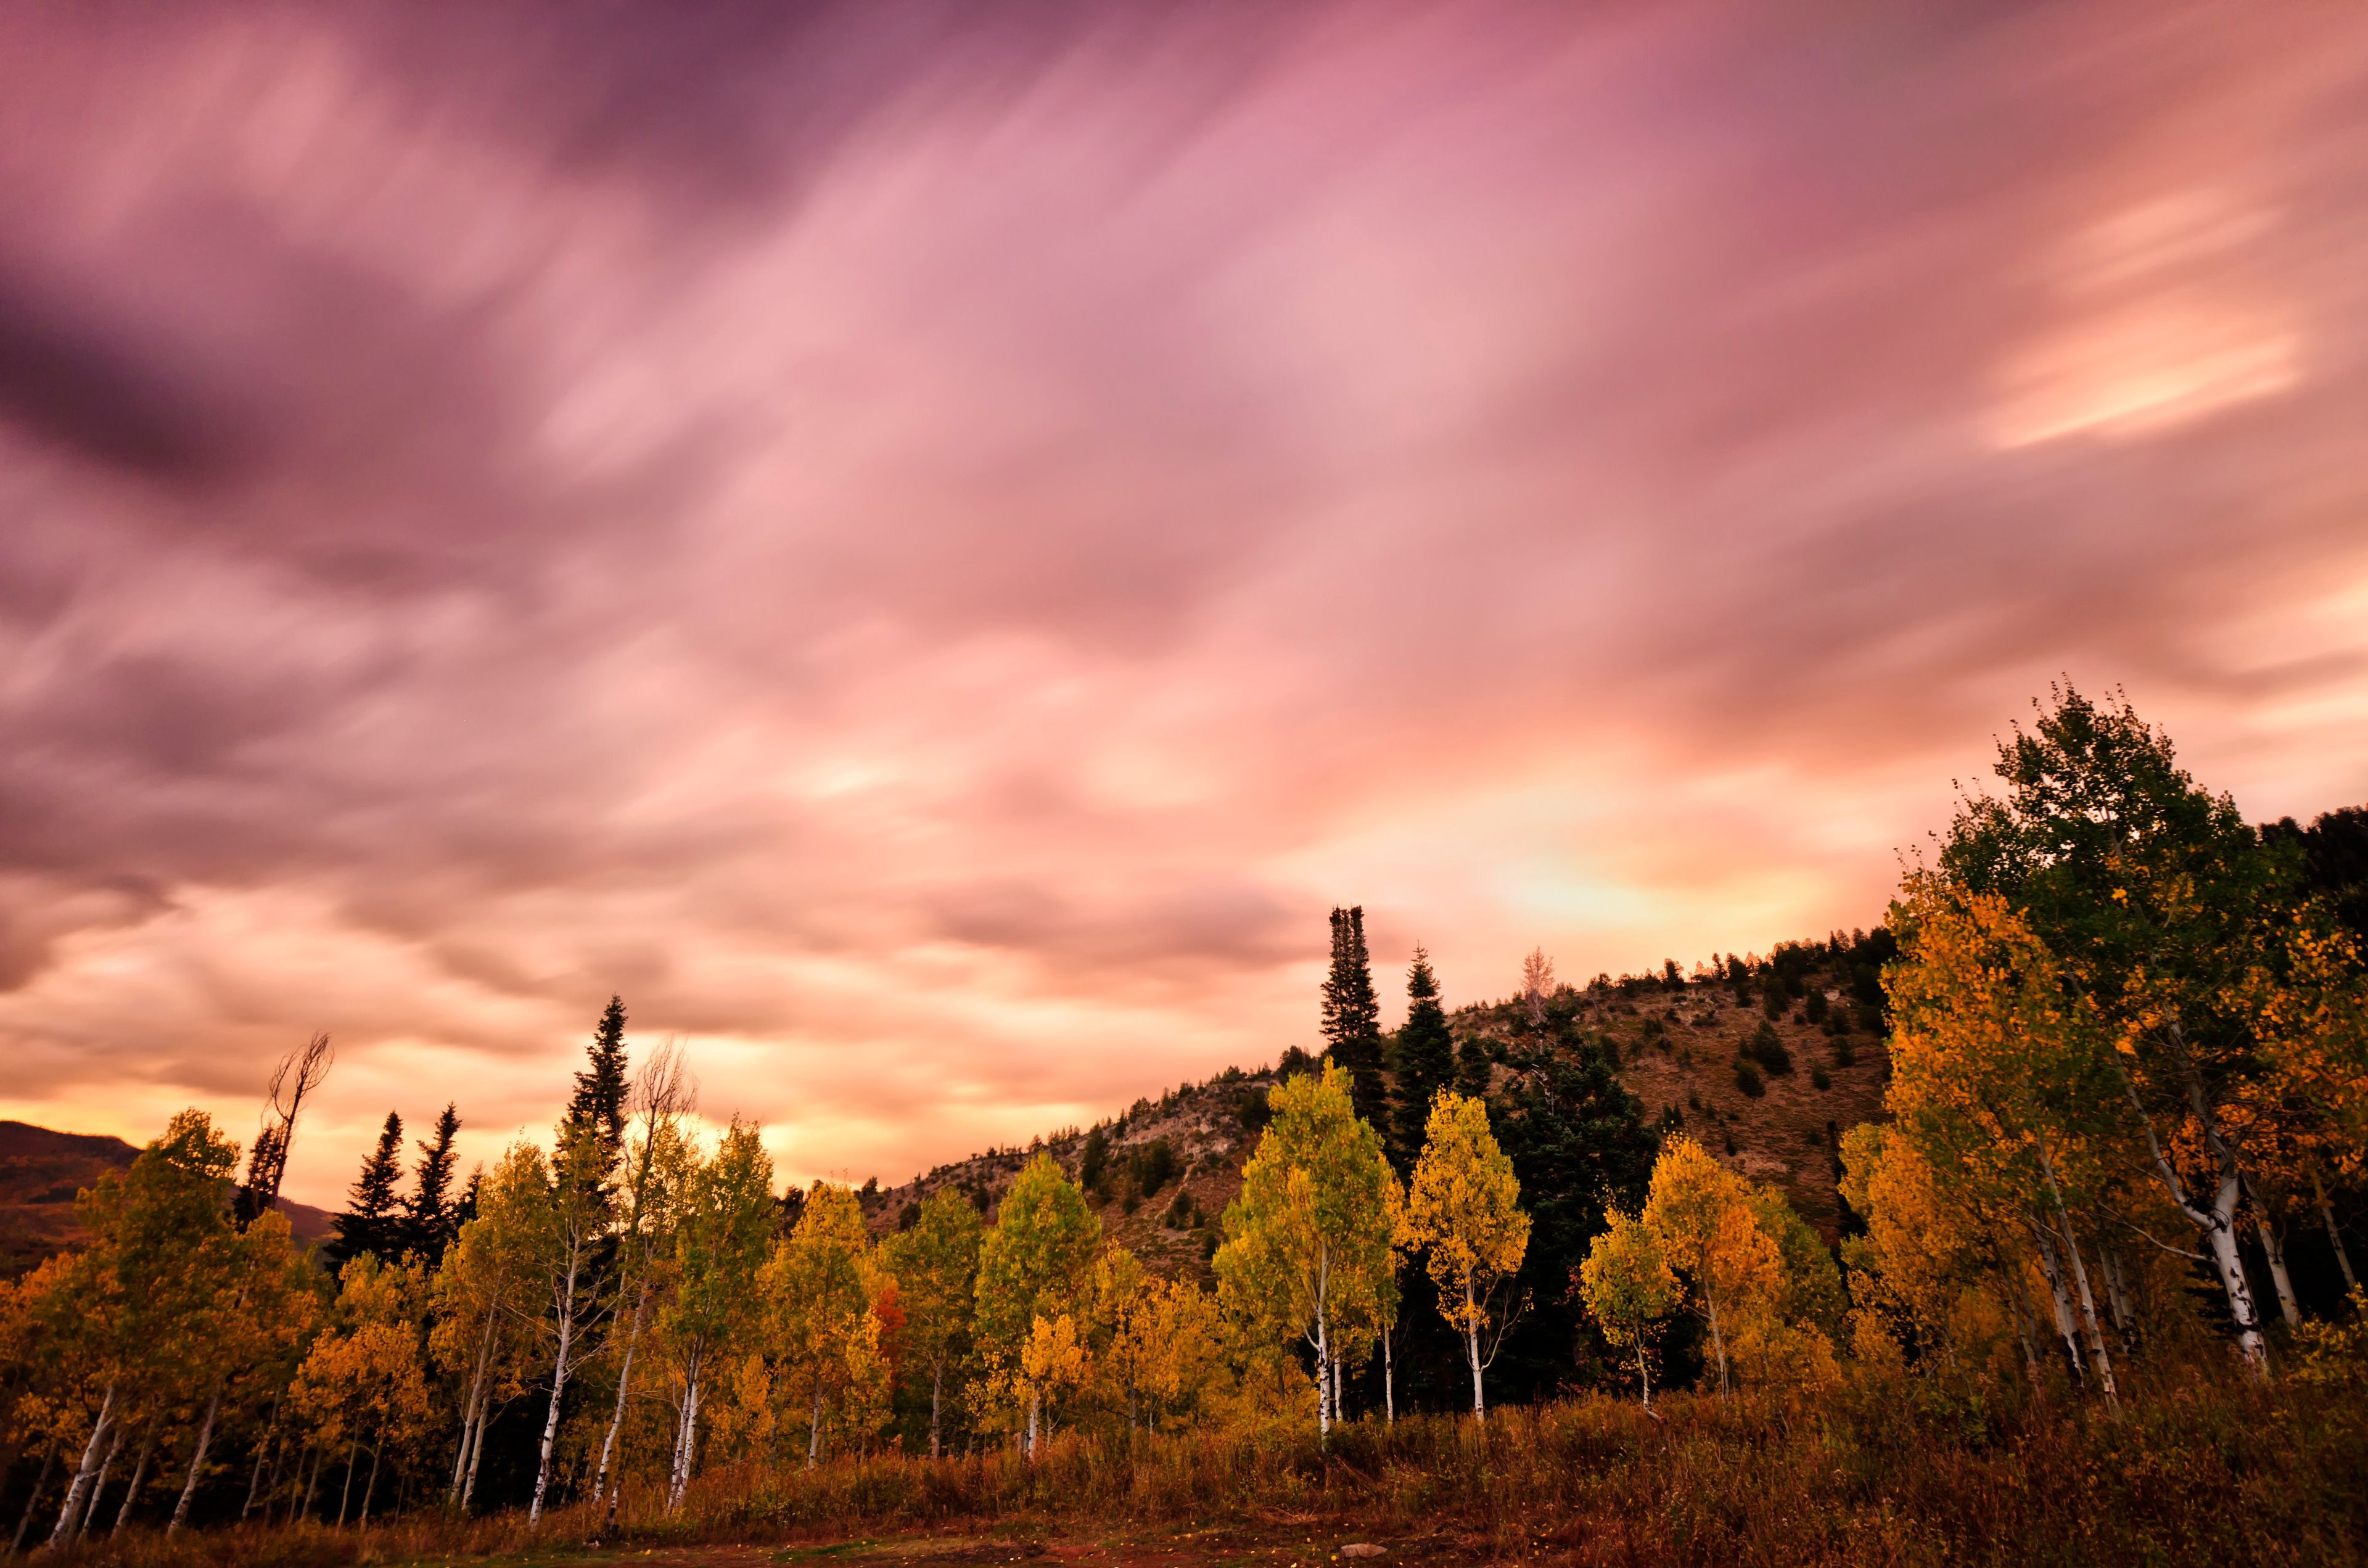 A mountainside with trees and a stormy sky at sunset.